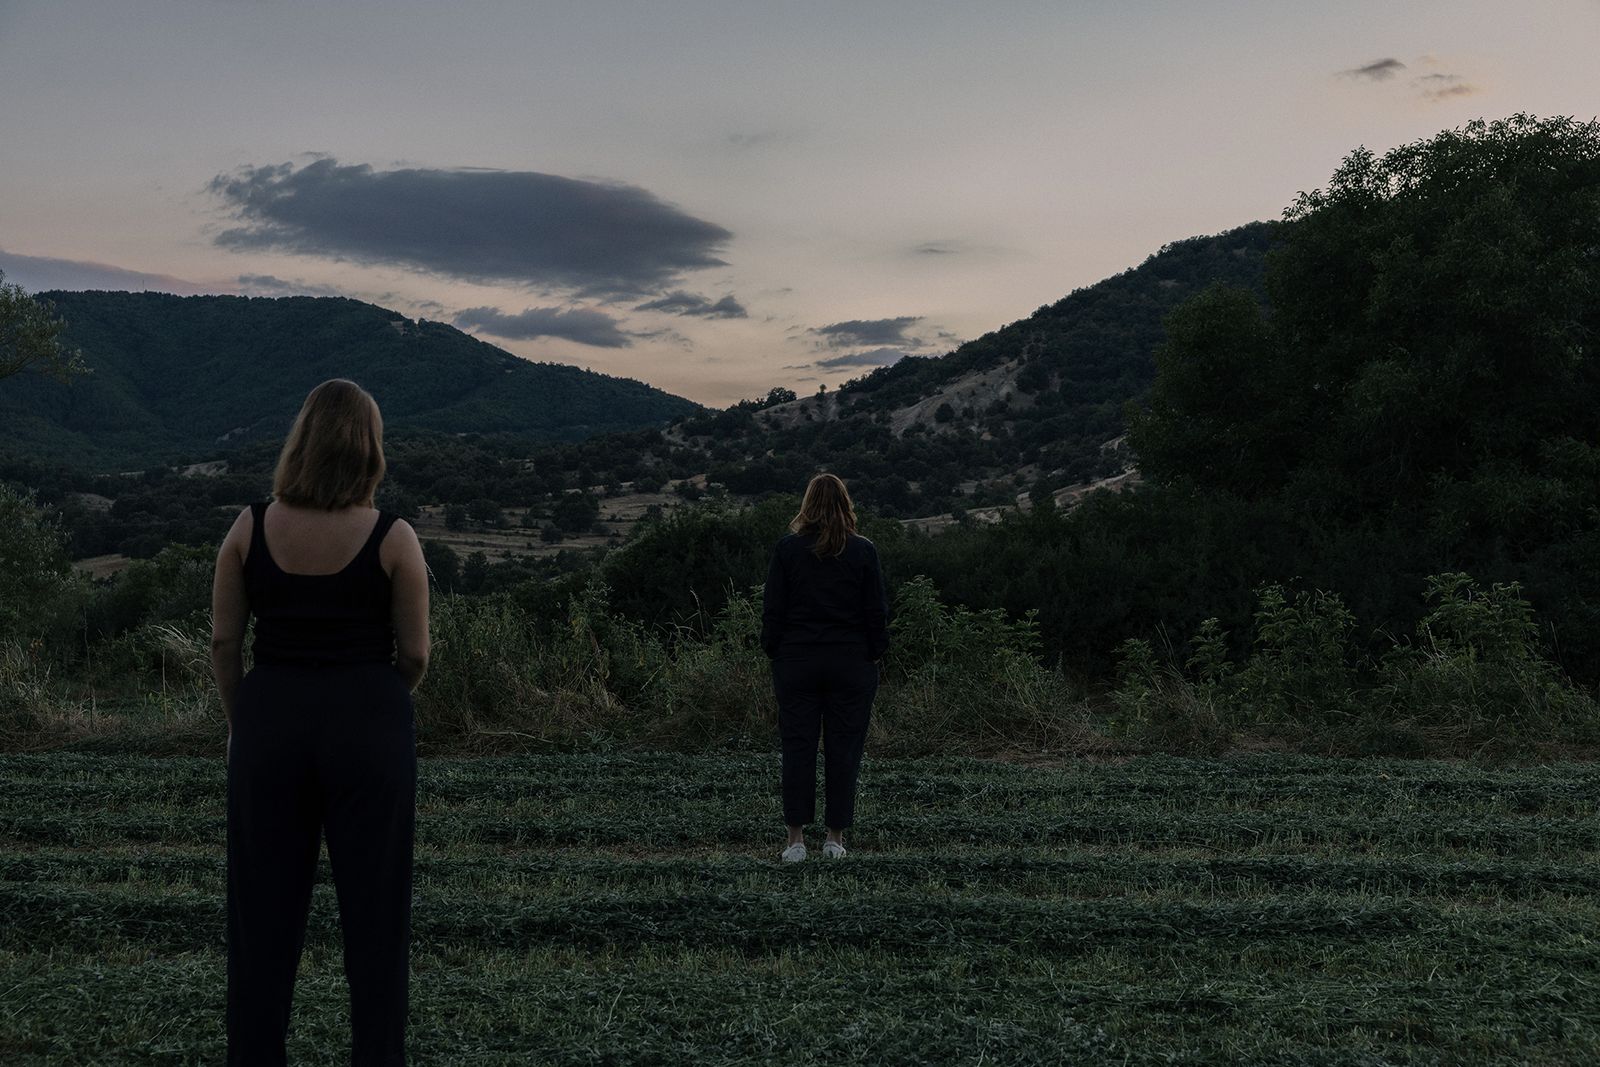 © Michaela Nagyidaiová - Observing the view and sunset in Eleni's birth village in northern Greece.